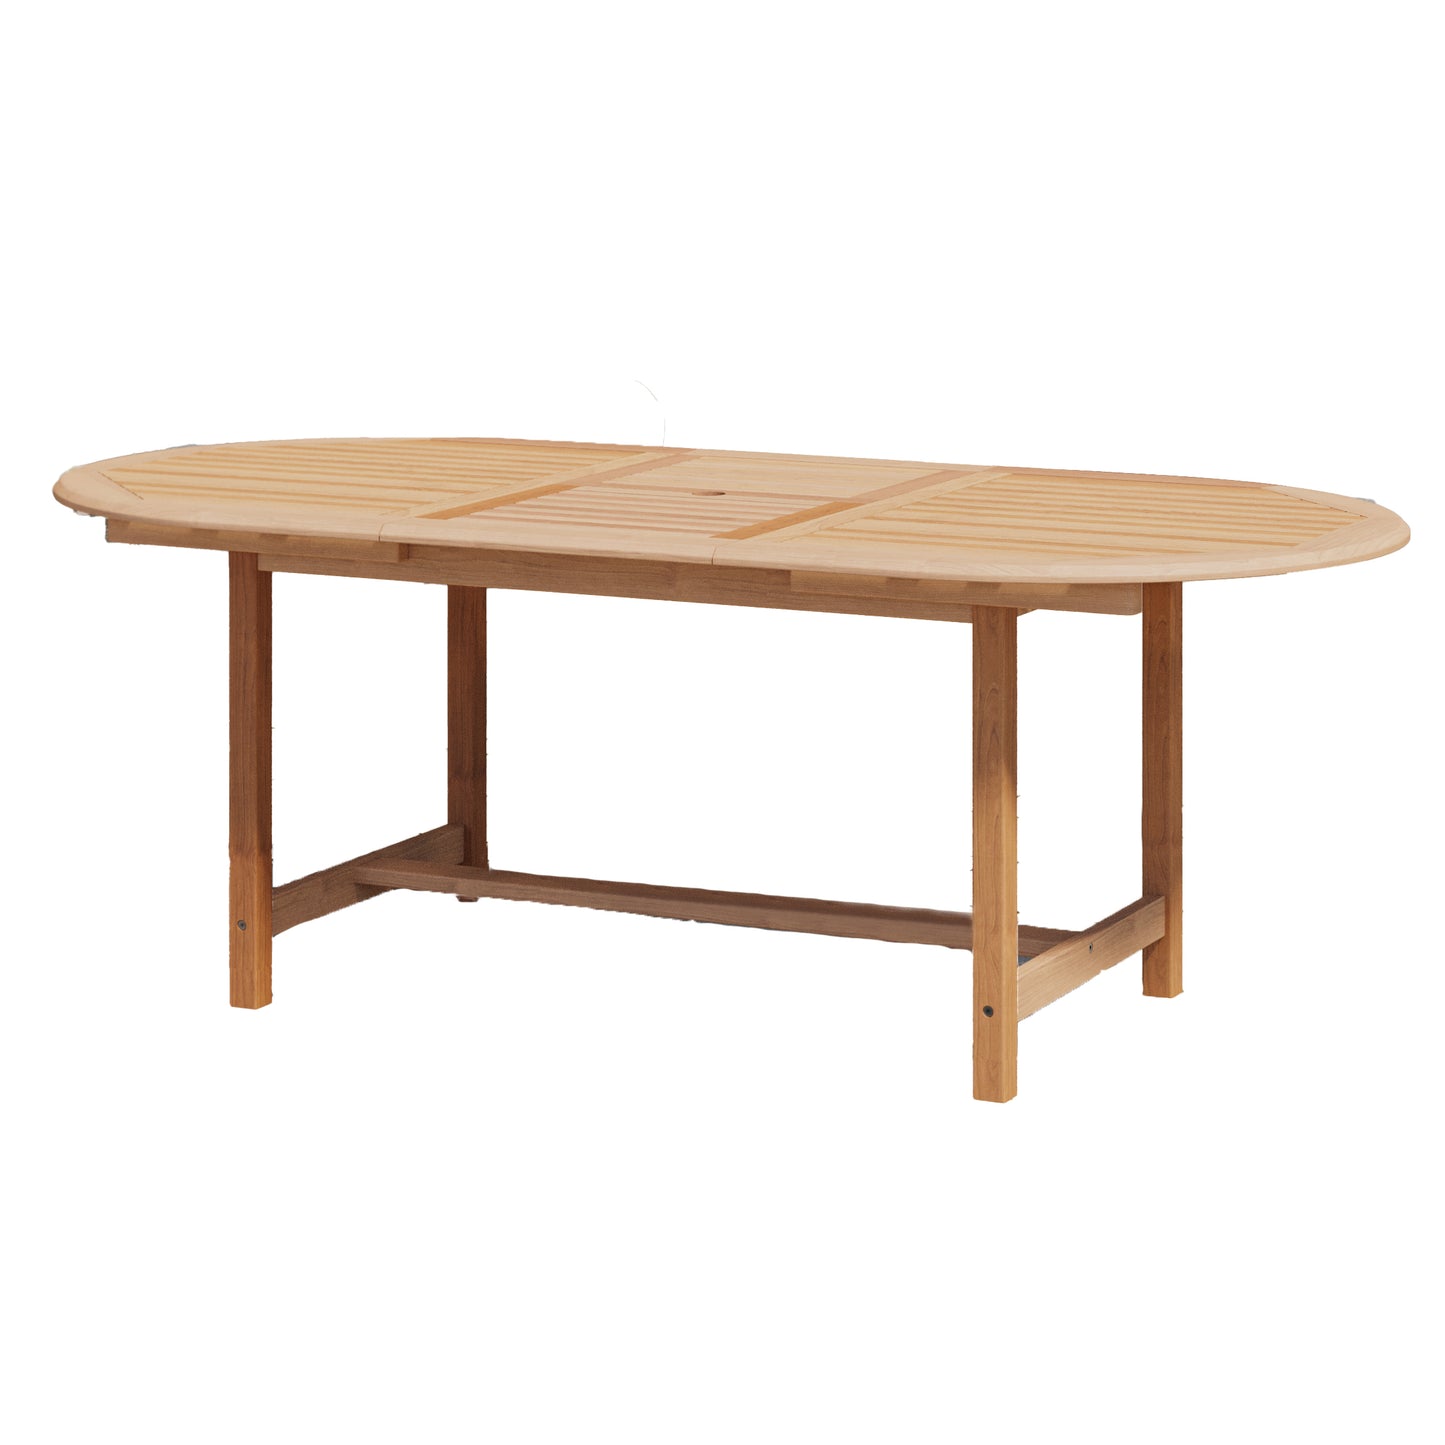 Dian Teak 100% FSC Solid Wood Extendable Oval Smal Table